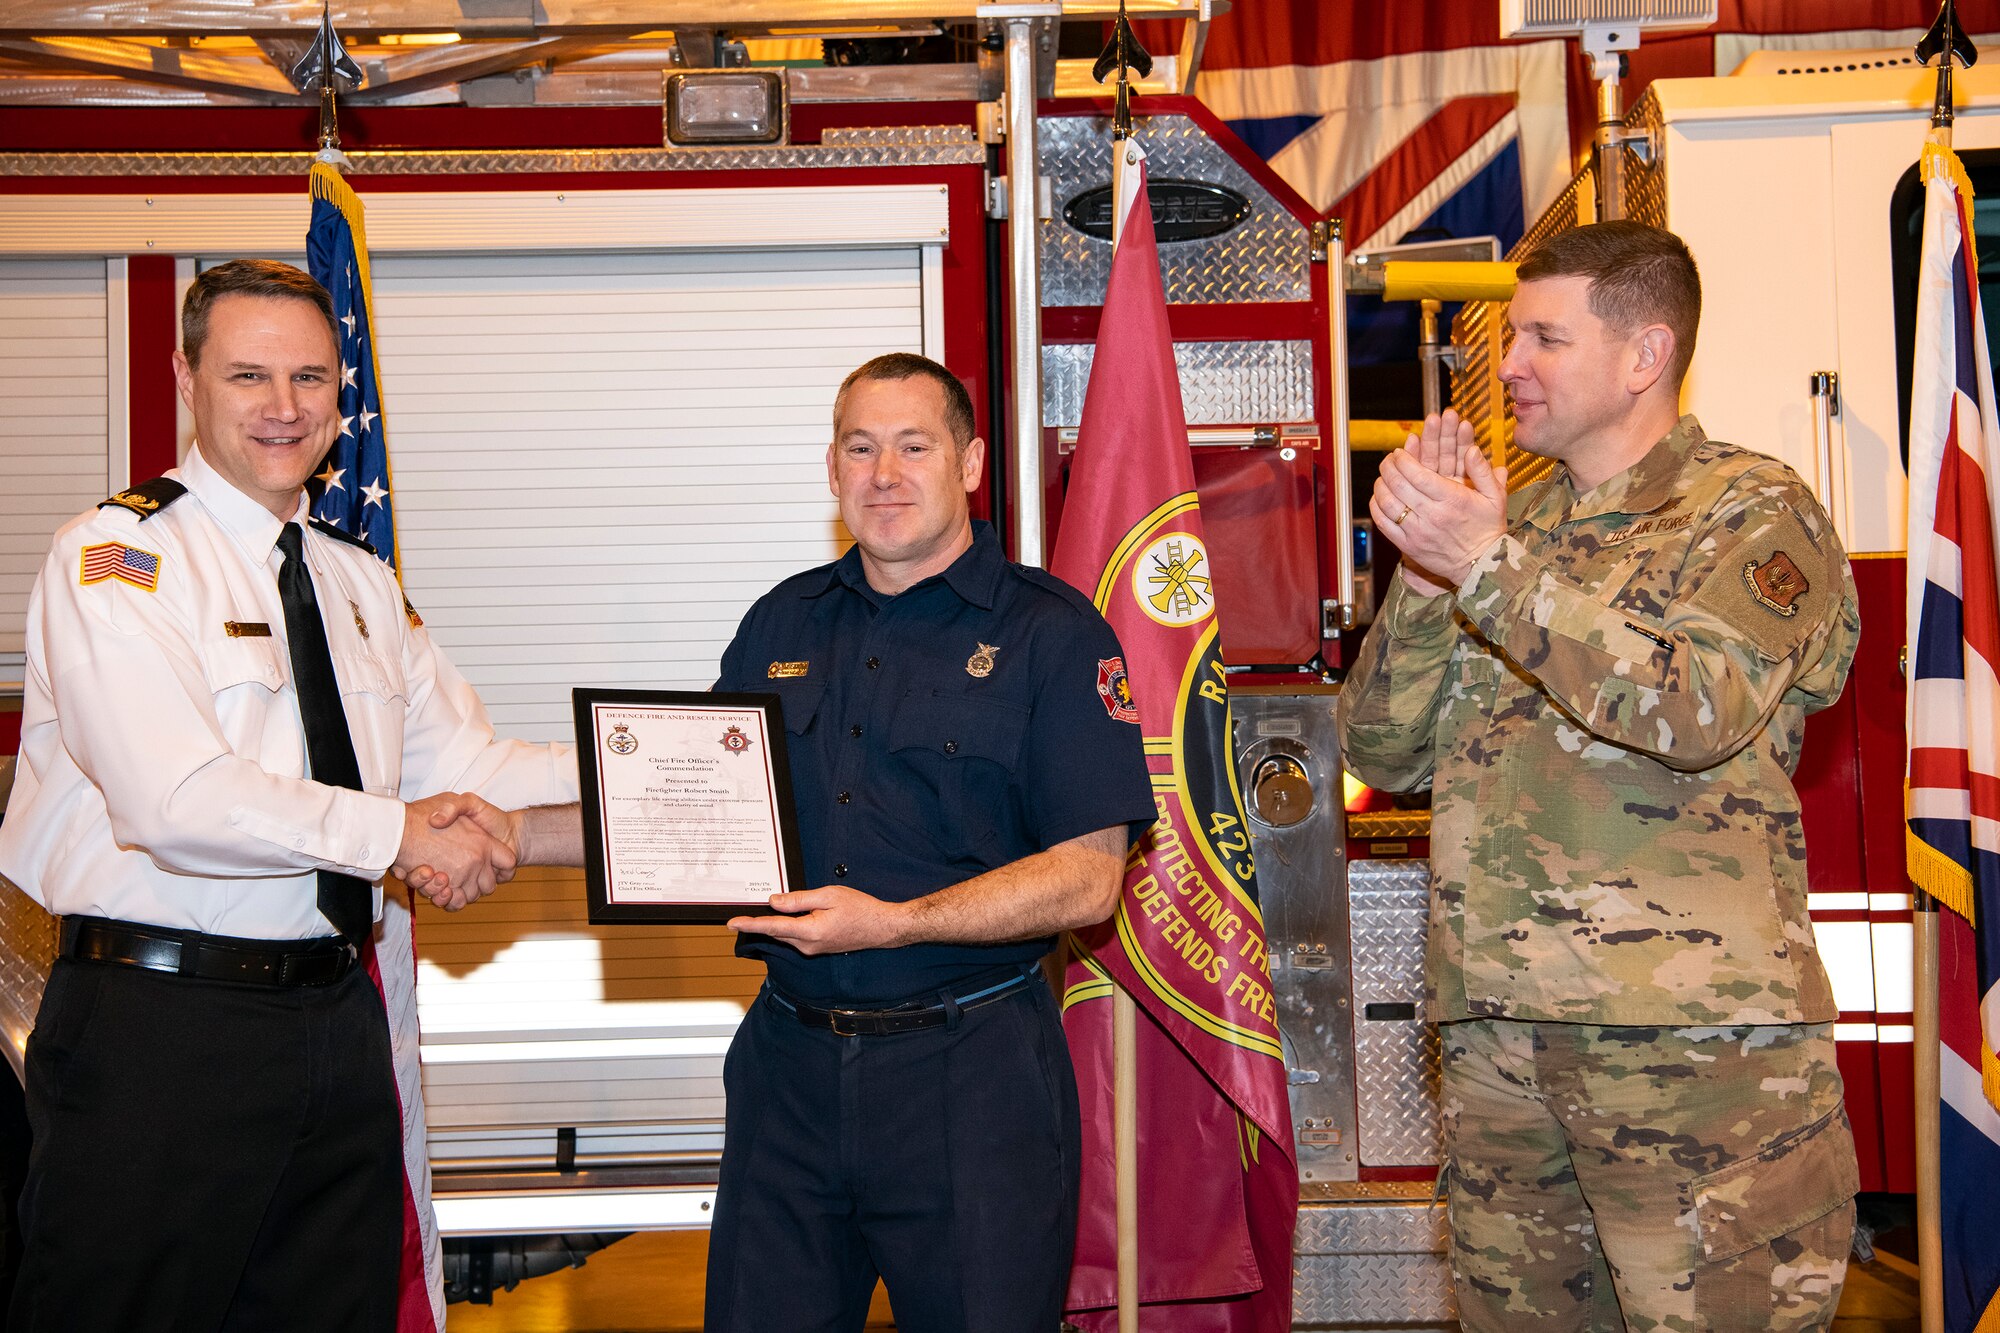 Robert Smith, center, 423rd Civil Engineer Squadron firefighter, receives a Chief Fire Officer’s commendation at RAF Alconbury, Dec. 20, 2019. Smith was recognized for exemplary lifesaving abilities under extreme pressure and clarity of mind for actions performed on August 21st. Smith administered CPR to his wife Karen for 17 minutes until paramedics arrived at his home. (U.S. Air Force photo by Senior Airman Eugene Oliver)